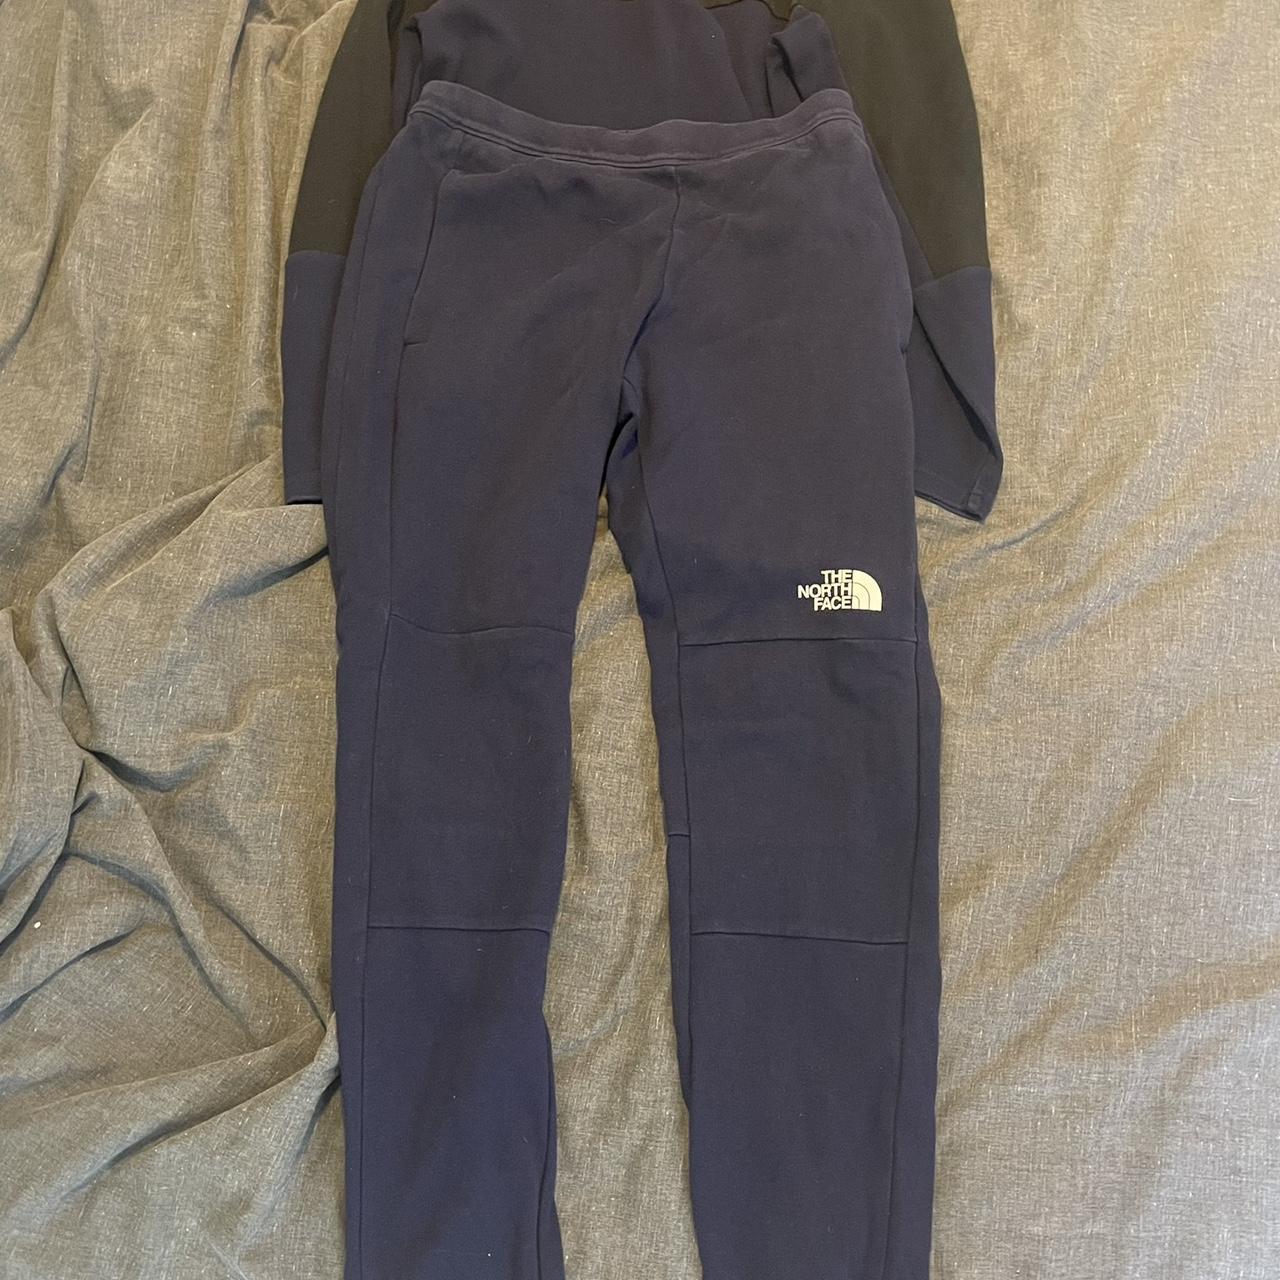 North face tracksuit Size large kids in both top... - Depop